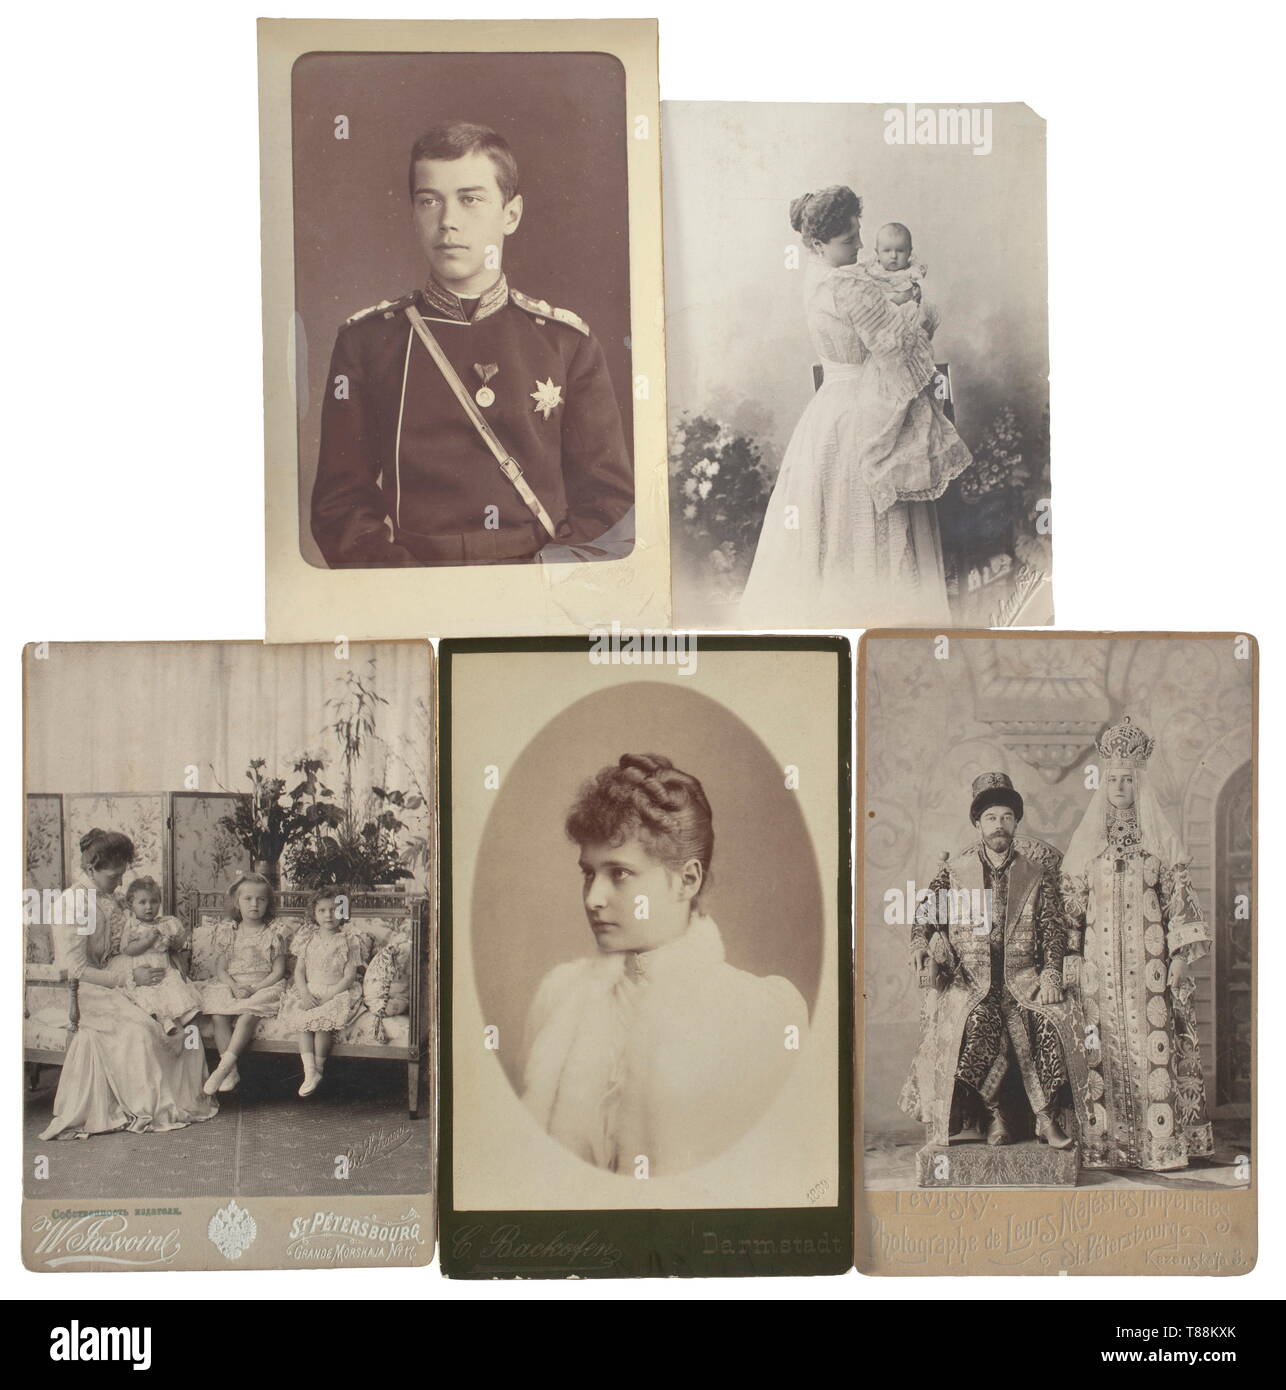 Five Russian gift photos of Tsar Nicholas II and Tsarina Alexandra with children Circa 1885 - 1900. Photo of the future Tsar. Embossed signature of the court photographer 'Levitsky' at the right edge (coating partially peeled away), photo of the imperial couple at the coronation with the photographer's name 'Levitsky, St. Petersbourg', stamped at back. Photo of Tsarina Alexandra and children with photographer's name 'W. Jasvoine, St. Petersbourg', photo of the Tsarina with the photographer's name 'C. Backofen Darmstadt'. Size circa 17 x 10.5 cm. , Additional-Rights-Clearance-Info-Not-Available Stock Photo